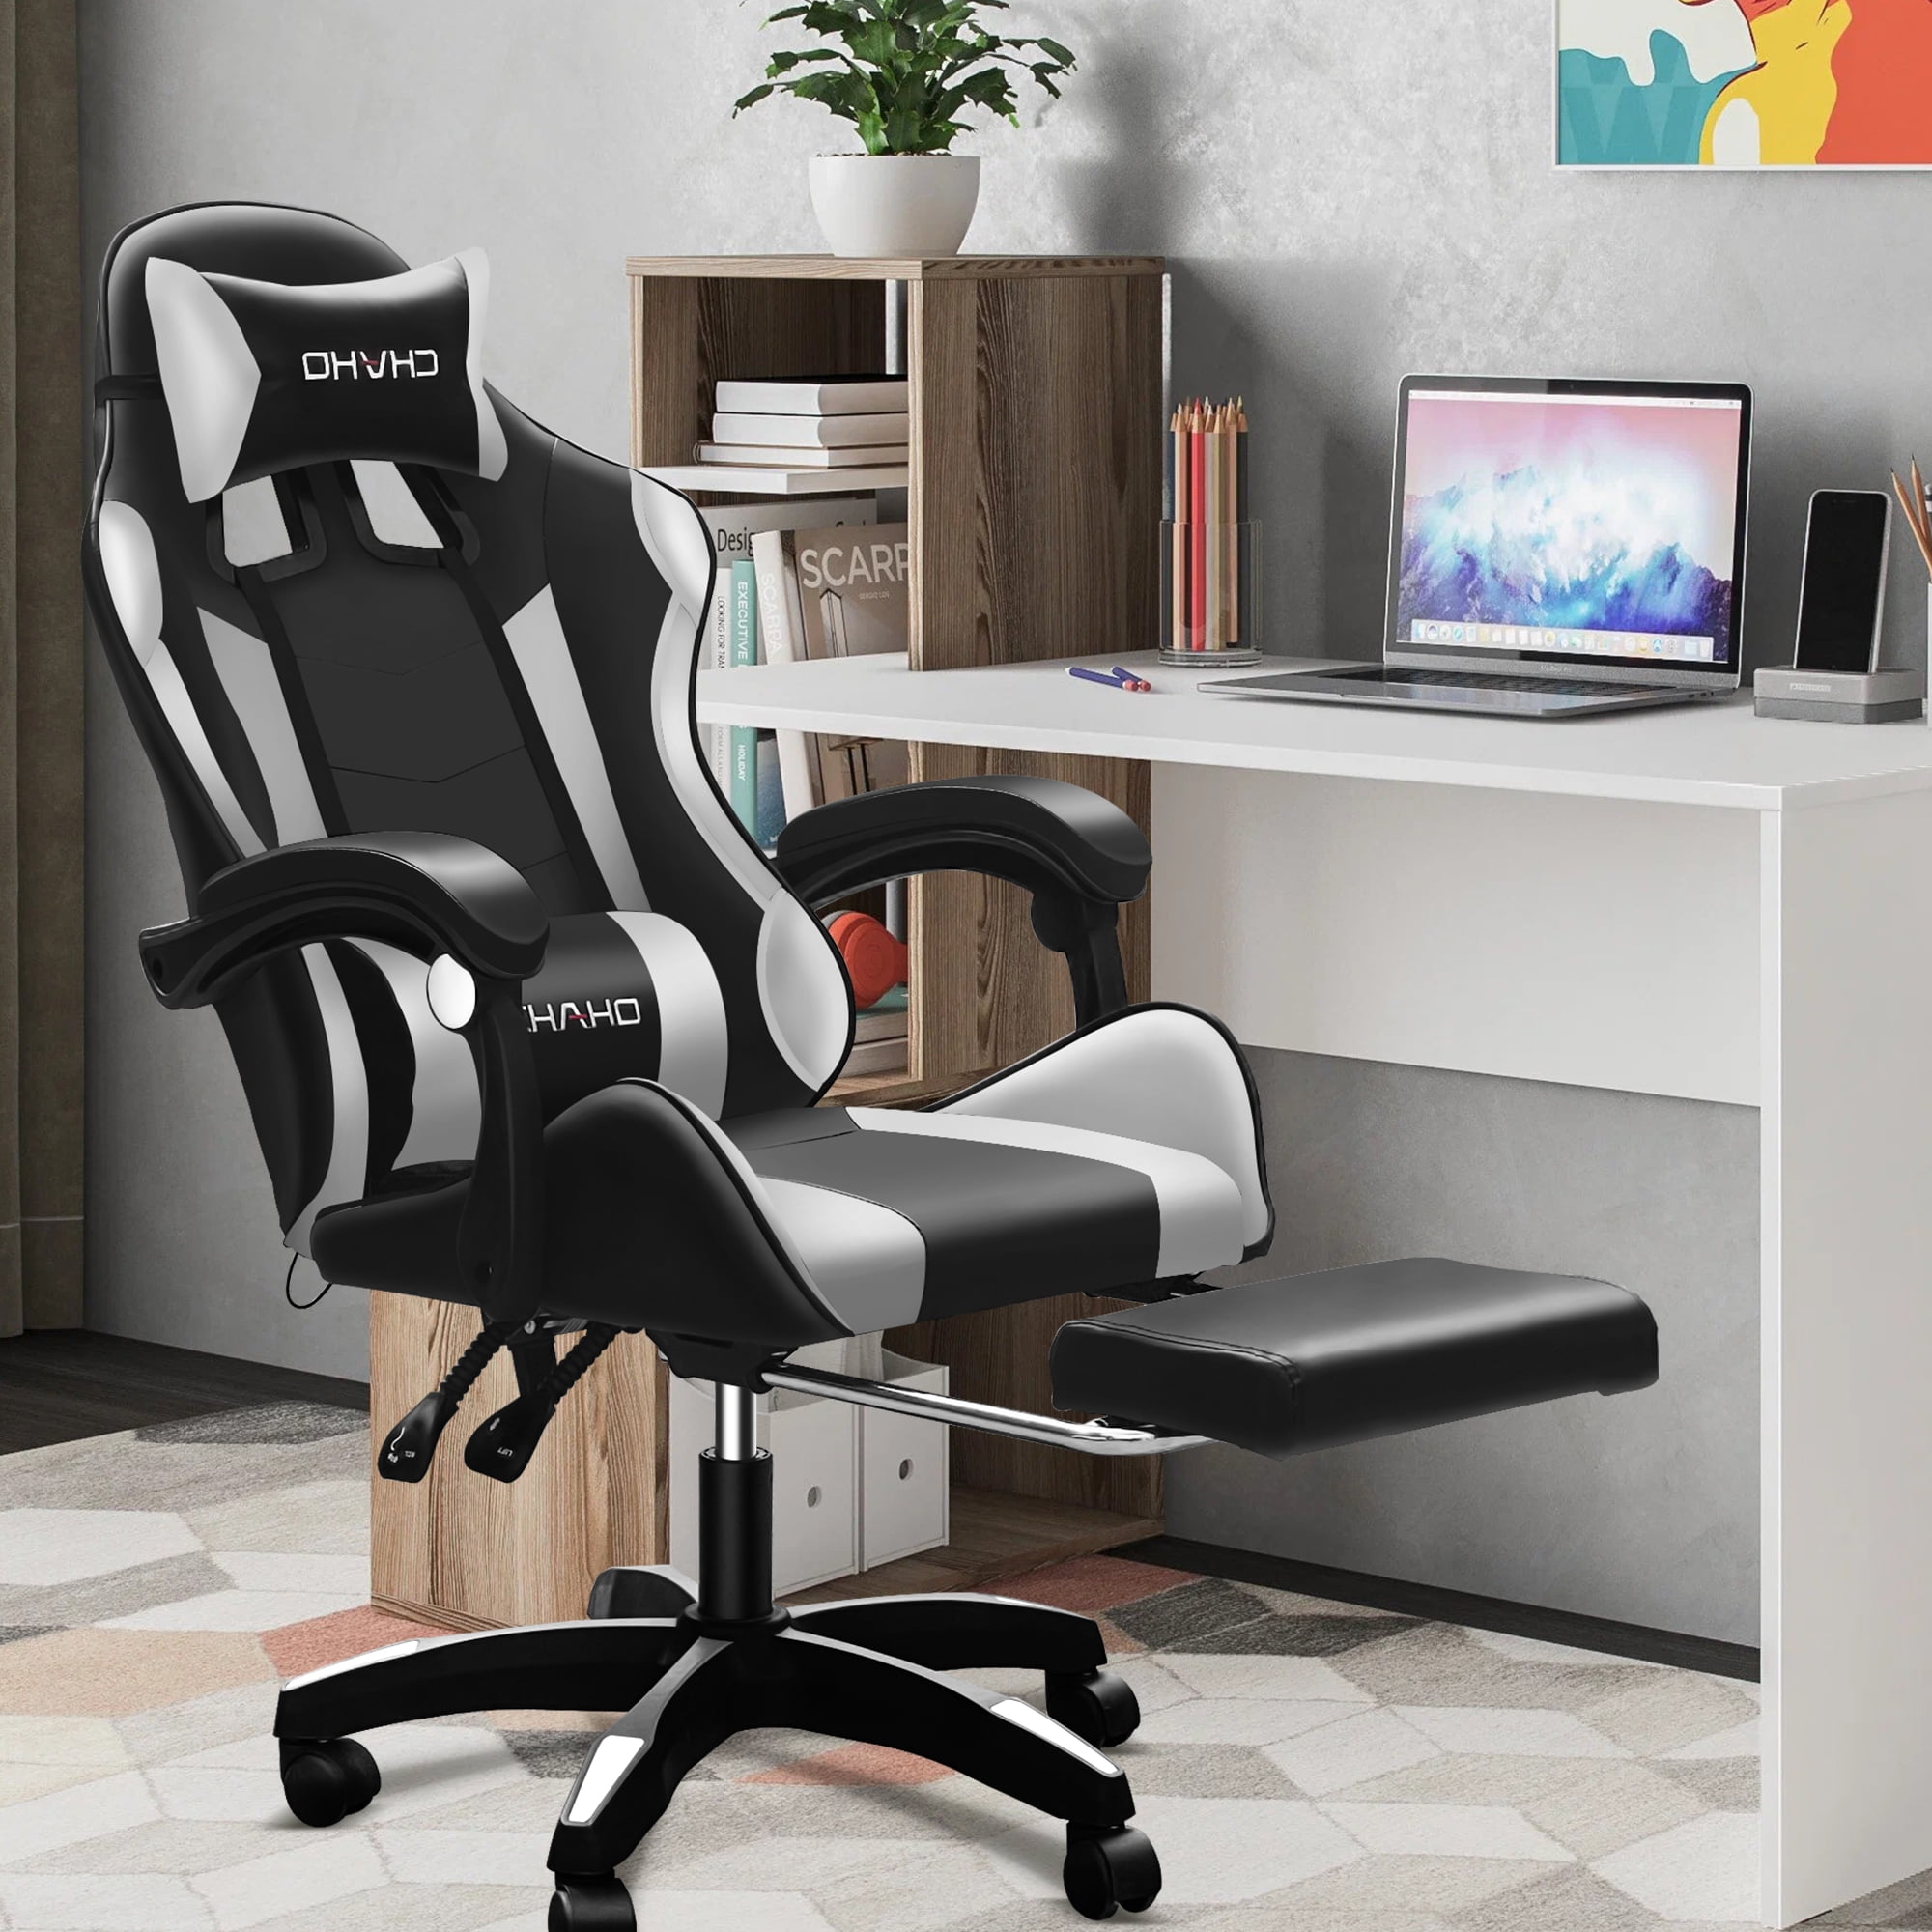 Office Gaming Chair Ergonomic Adjustable Chair Head and Lumbar Pillows - On  Sale - Bed Bath & Beyond - 38232771